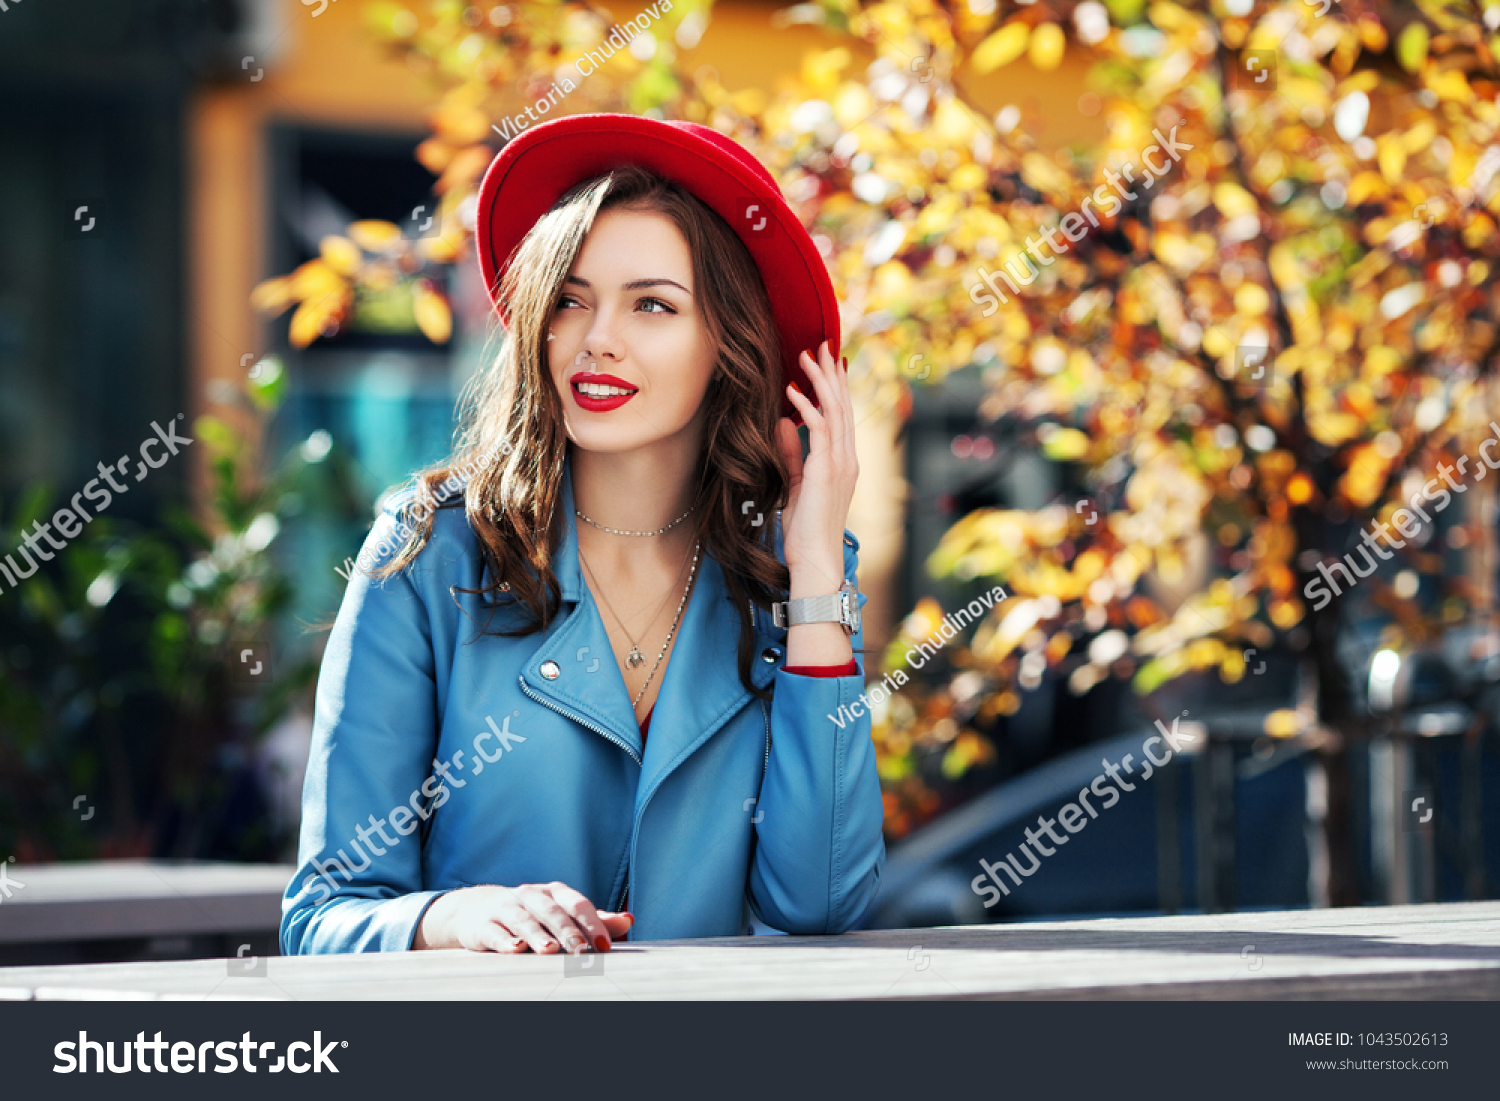 35,622 Outfit blue red Images, Stock Photos & Vectors | Shutterstock